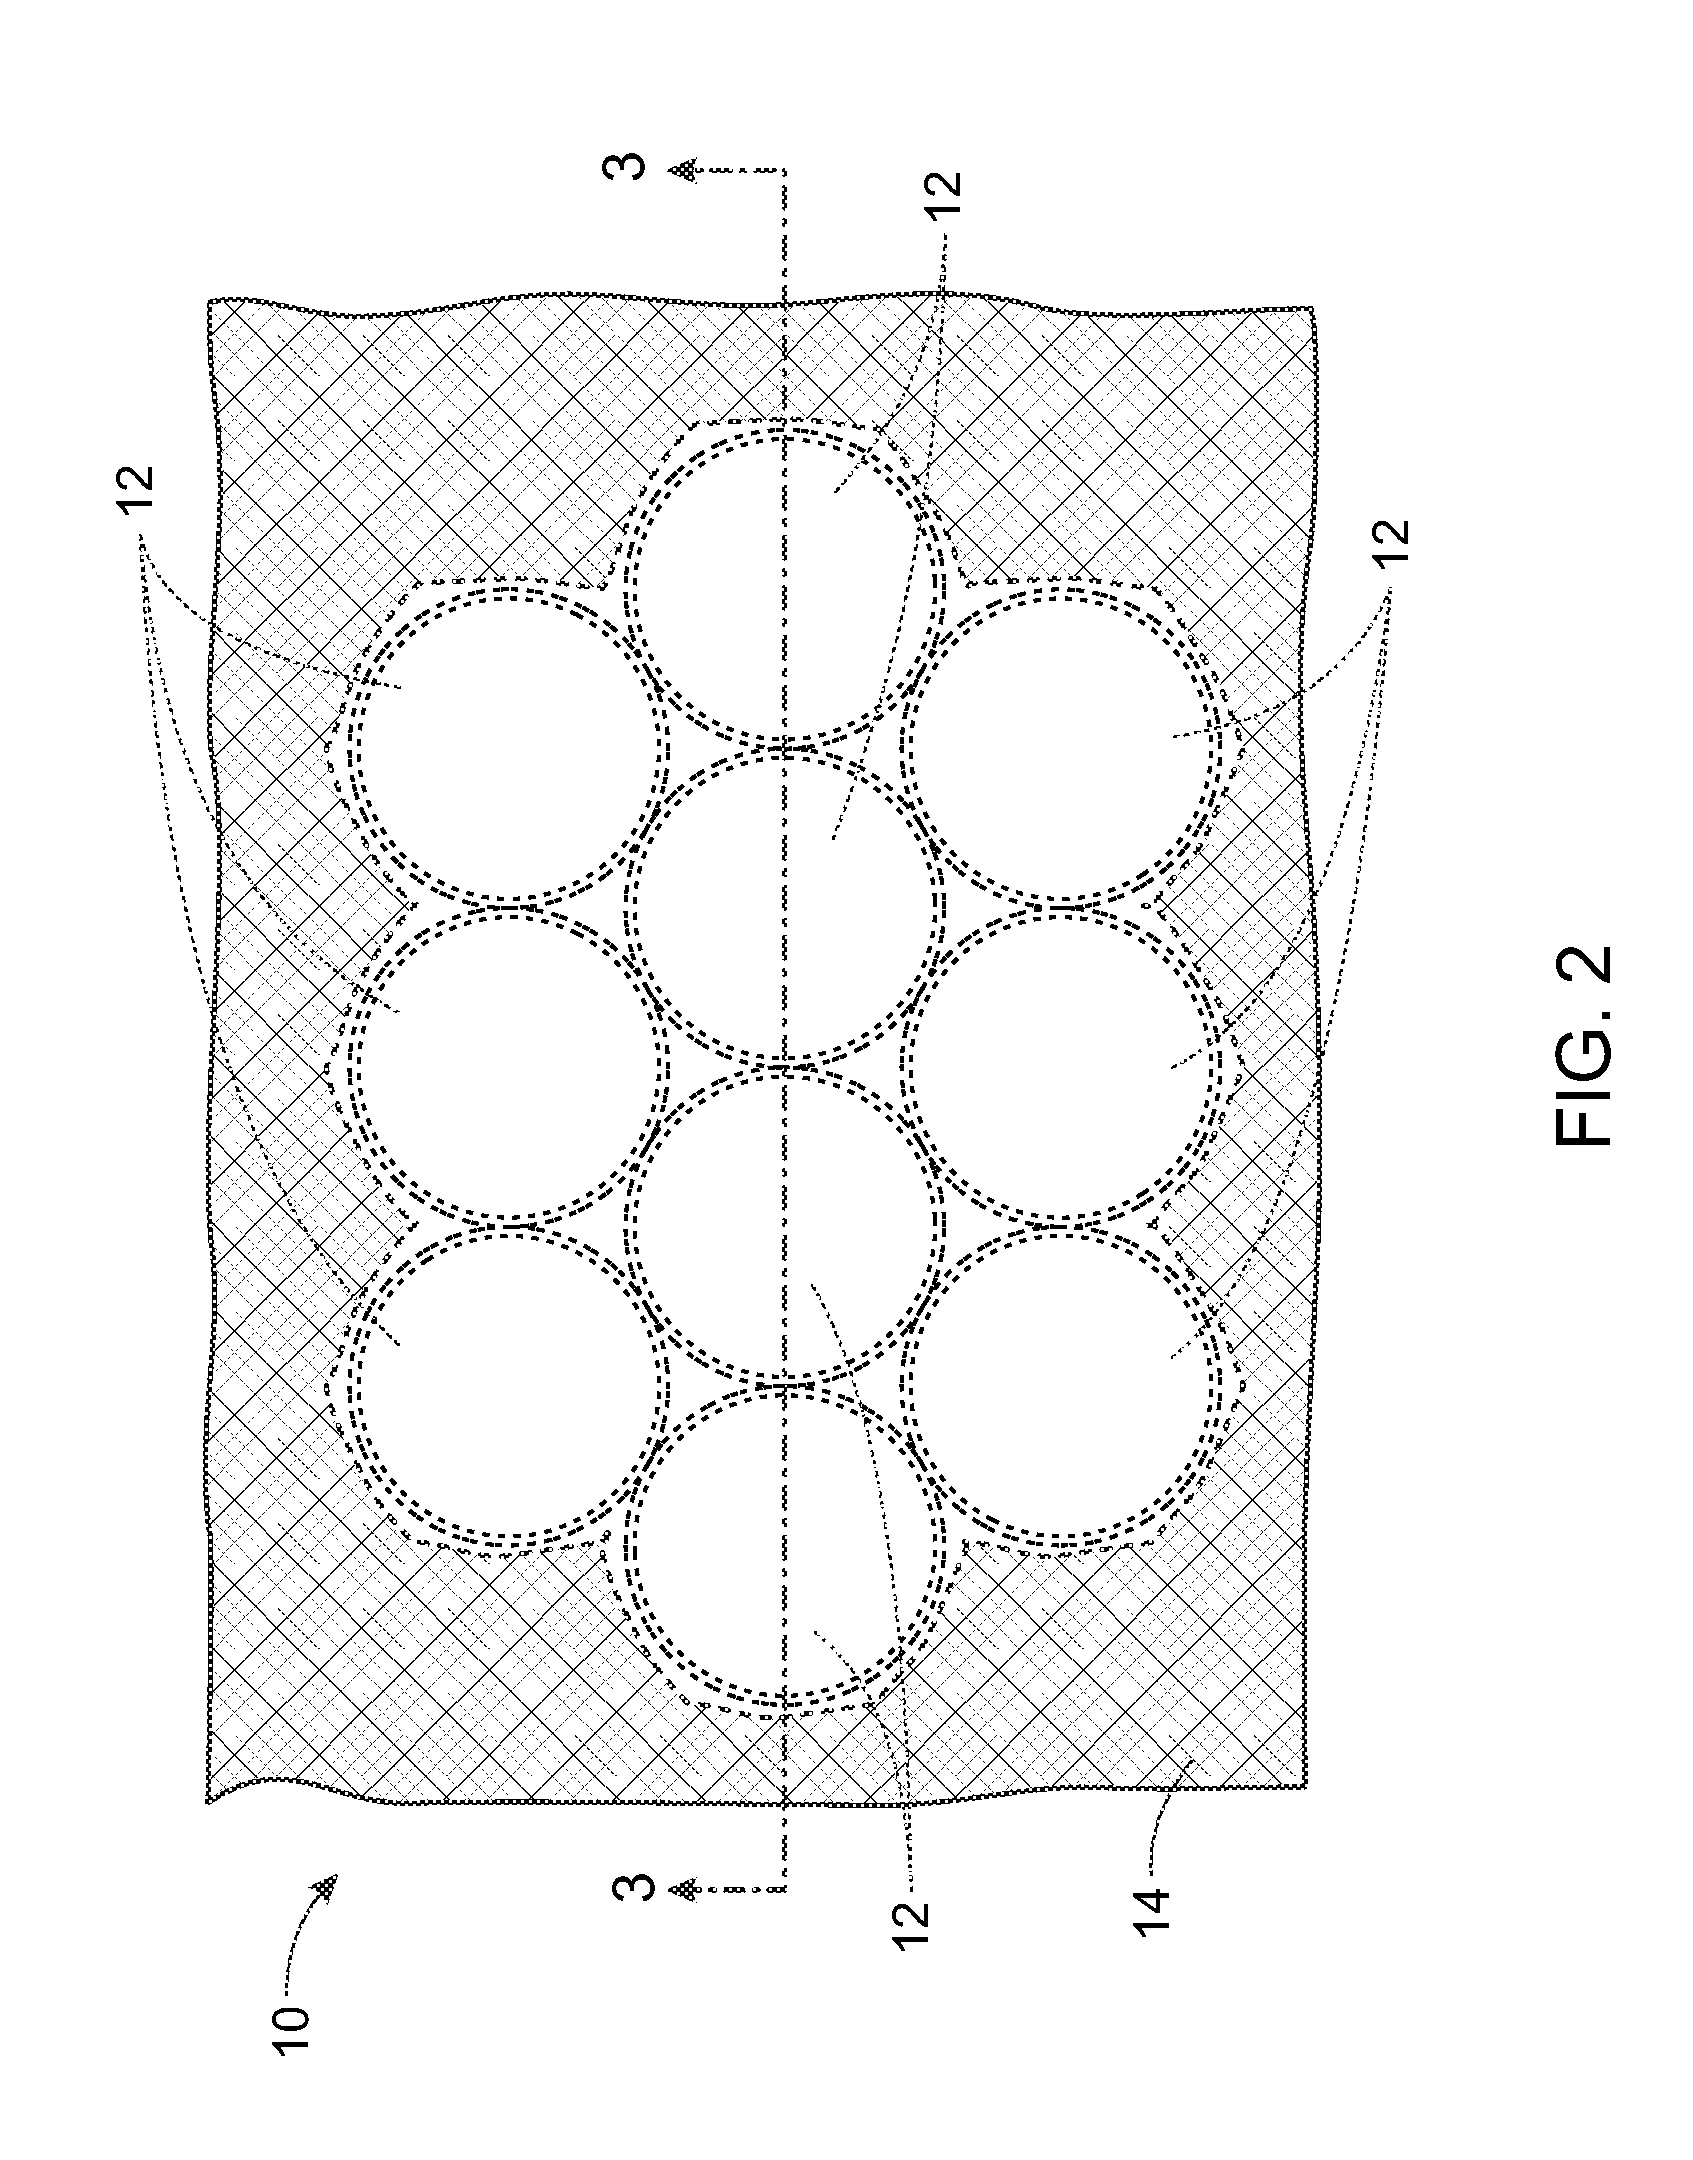 Flat packaging of petri dishes for prolonged preservation and method of producing the same